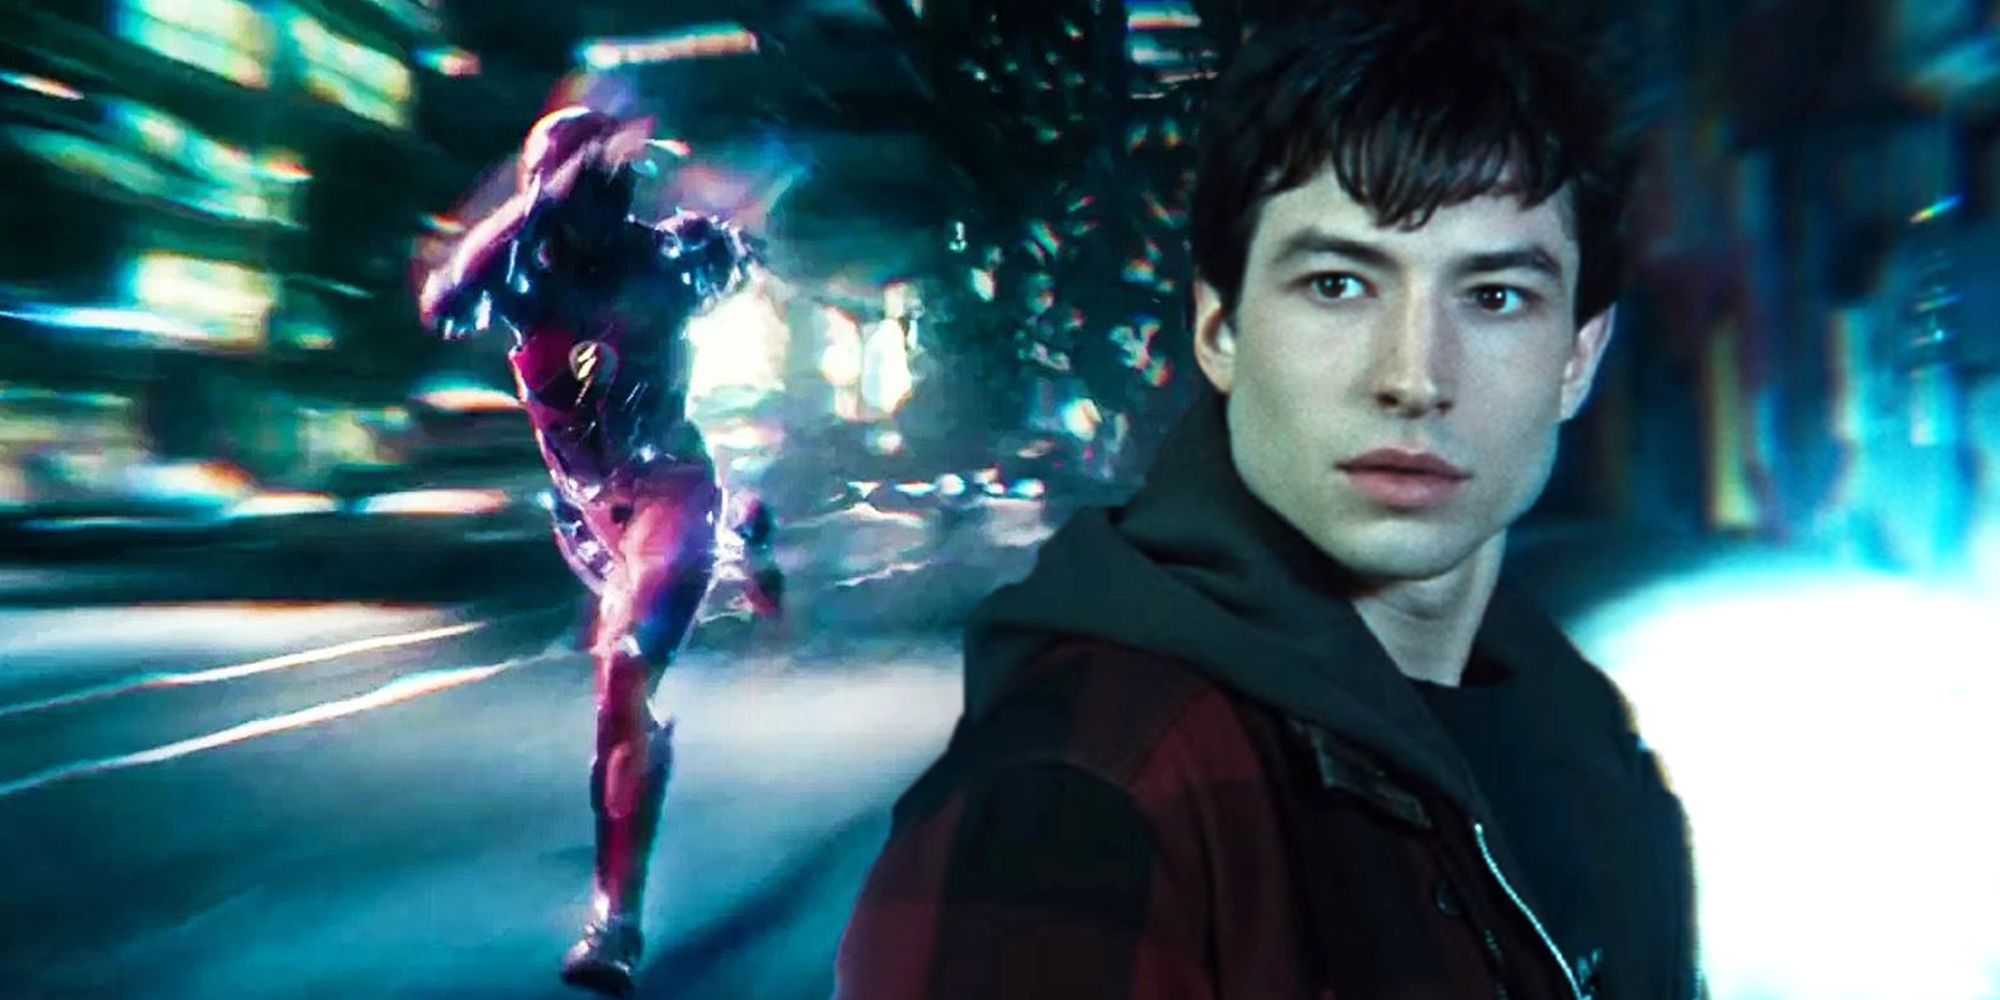 Ezra Miller as Barry Allen aka The Flash in the Justice League Snyder Cut